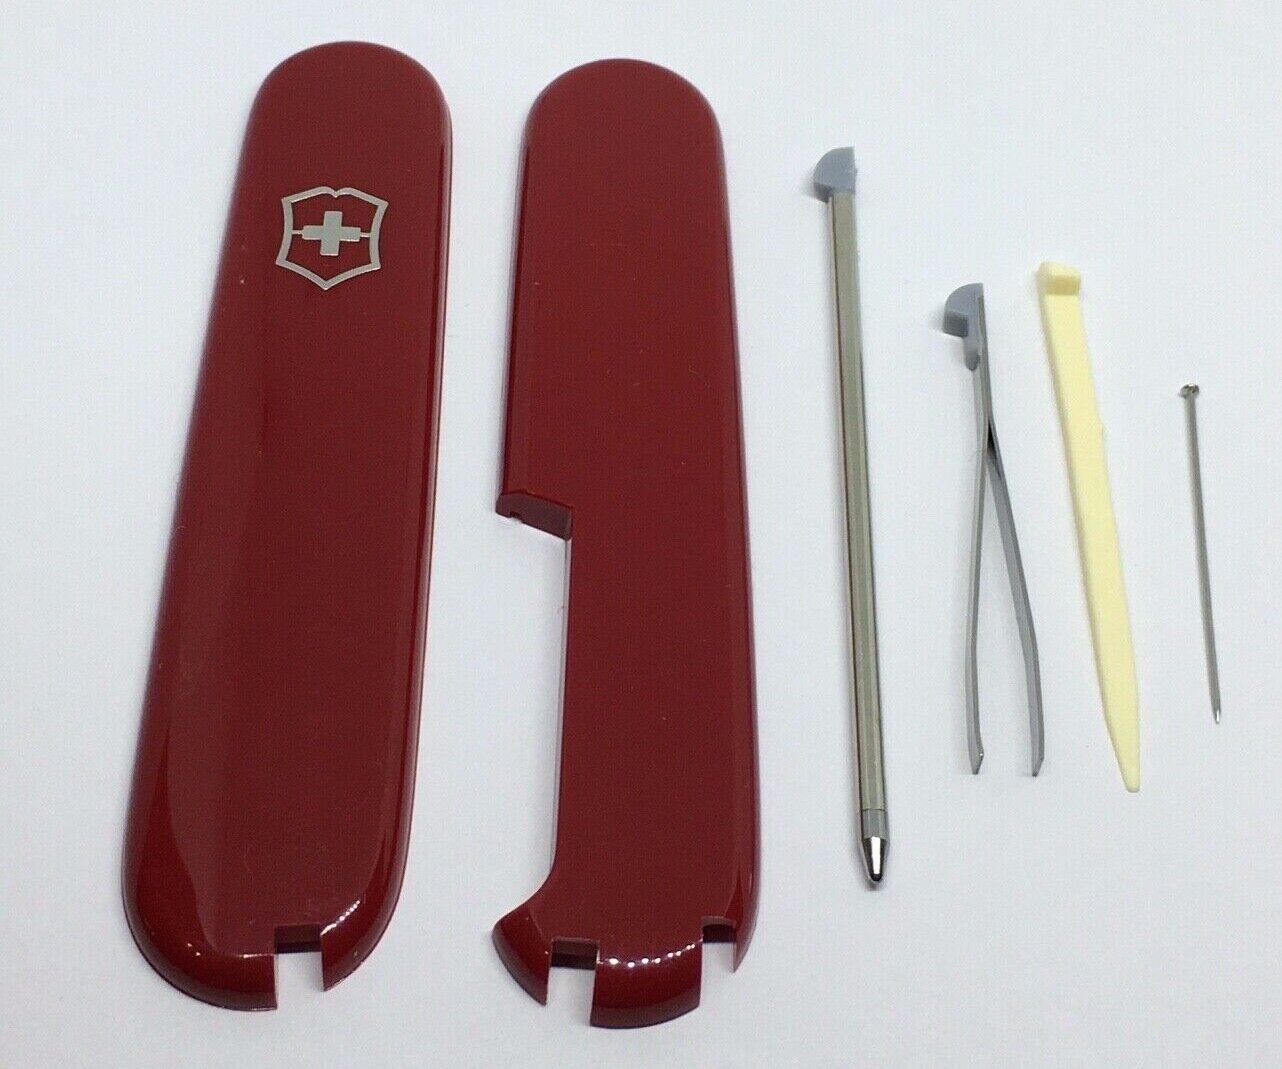 VICTORINOX  SWISS ARMY KNIFE 91mm SCALES/HANDLES PLUS  + 4 Accessories with pen